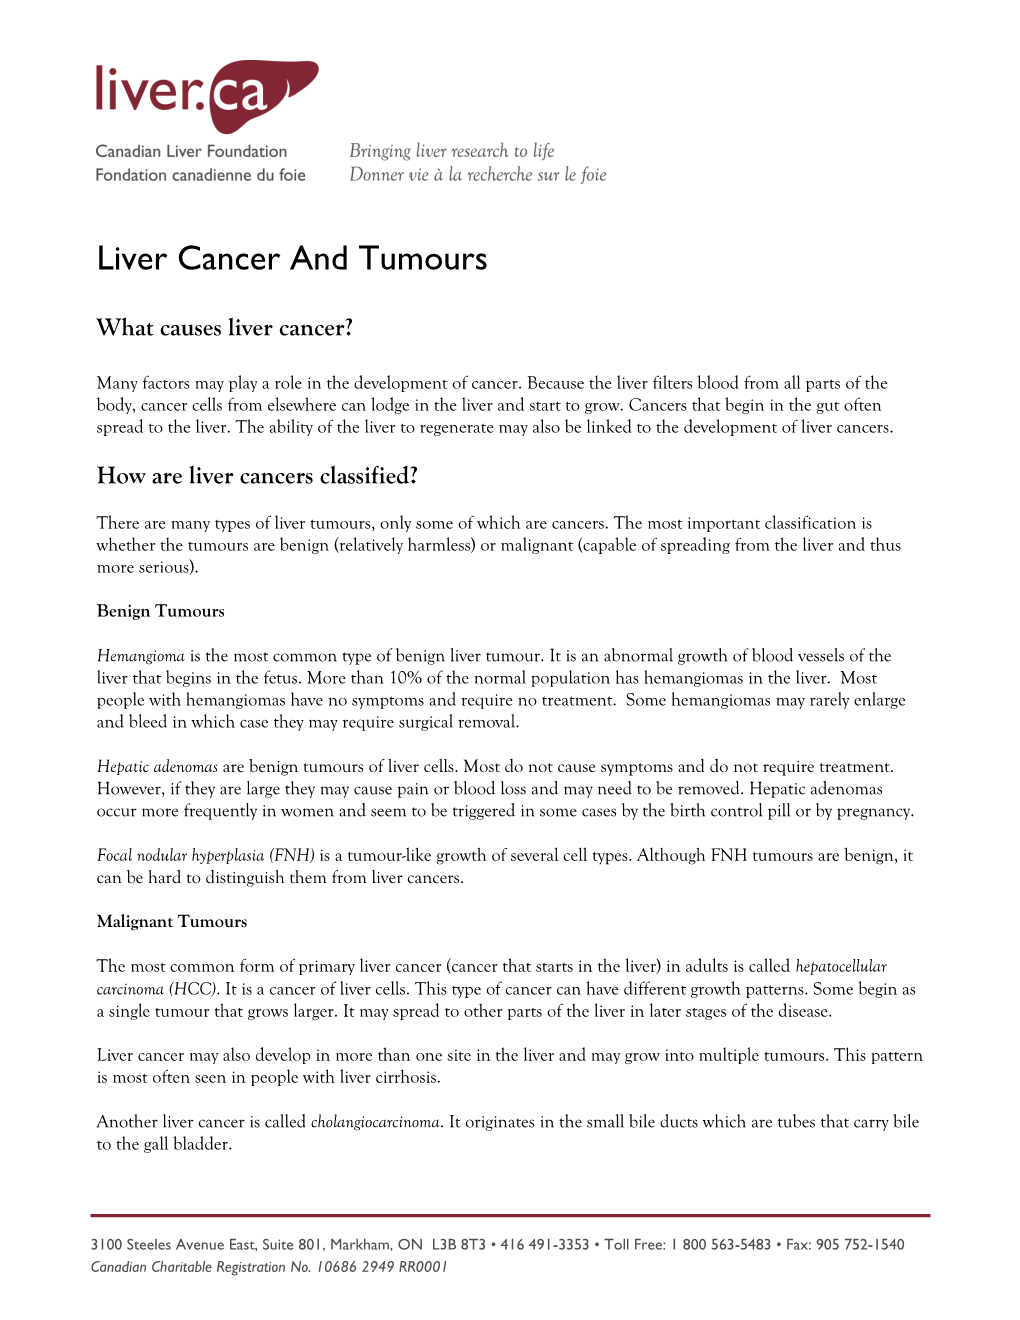 Liver Cancer and Tumours